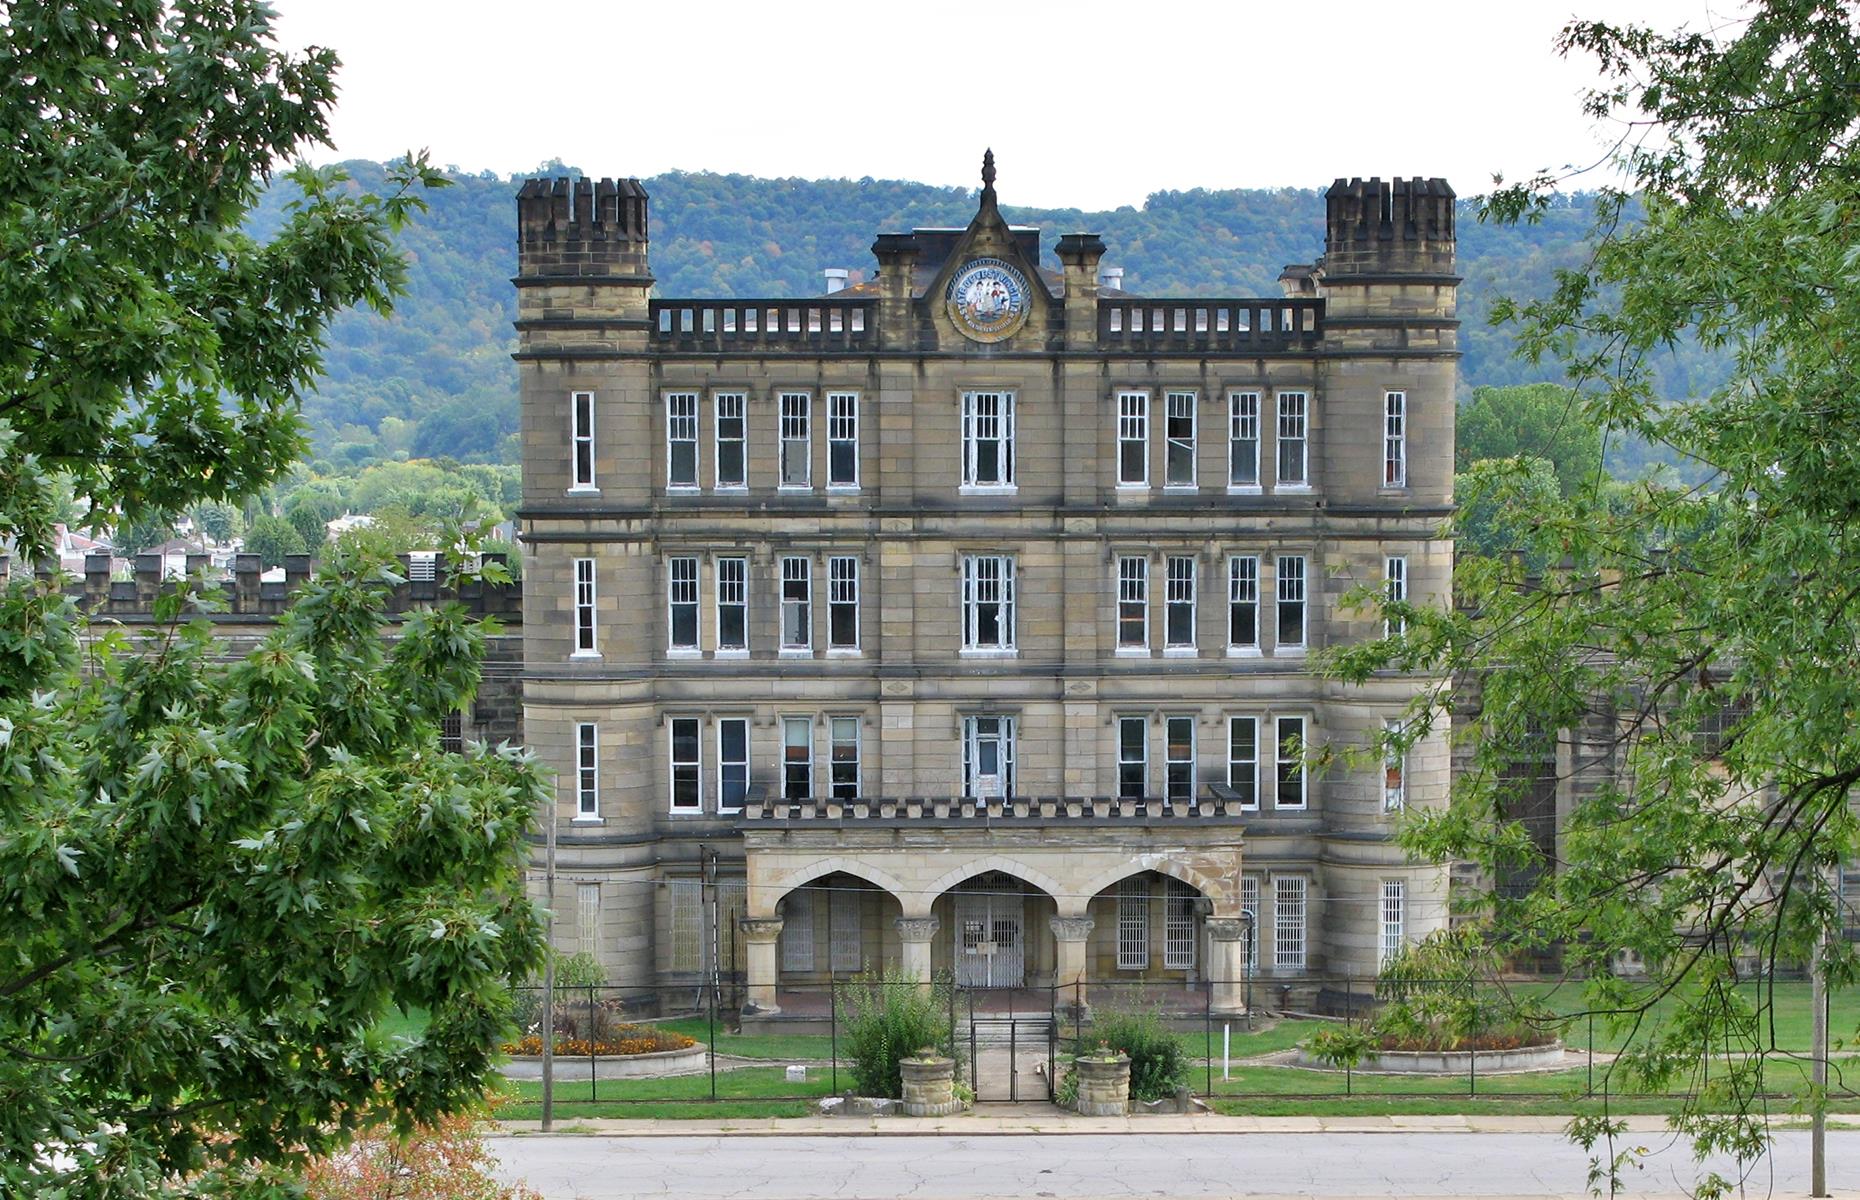 <p>It's not uncommon for former prisons to be plagued with tales of spirits and specters – and the <a href="https://wvpentours.com/">West Virginia Penitentiary</a> is no exception. The castle-like prison was opened in 1876 and was known for its chilling conditions and super-cramped cells, as well as riots, breakouts and many harrowing executions. The most terrifying portion of all is the North Hall, nicknamed the Alamo by former inmates. This max-security area is said to be haunted by the ghosts of one-time prisoners and you can explore it on <a href="https://wvpentours.com/tours/">a guided walk</a>.</p>